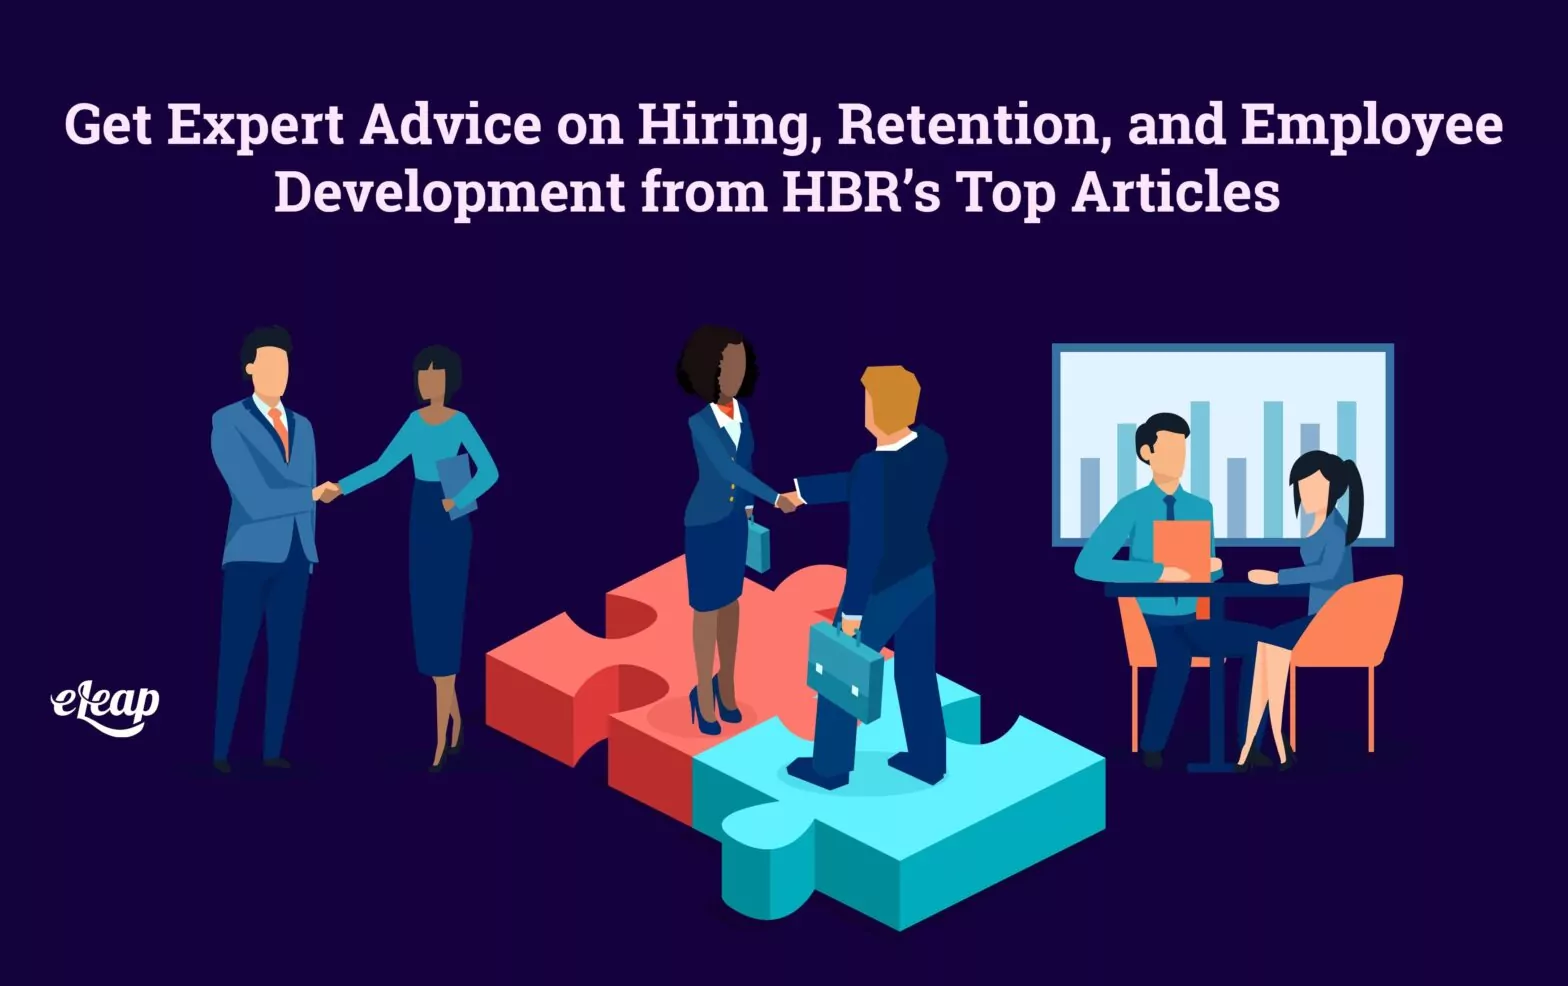 Get Expert Advice on Hiring, Retention, and Employee Development from HBR’s Top Articles